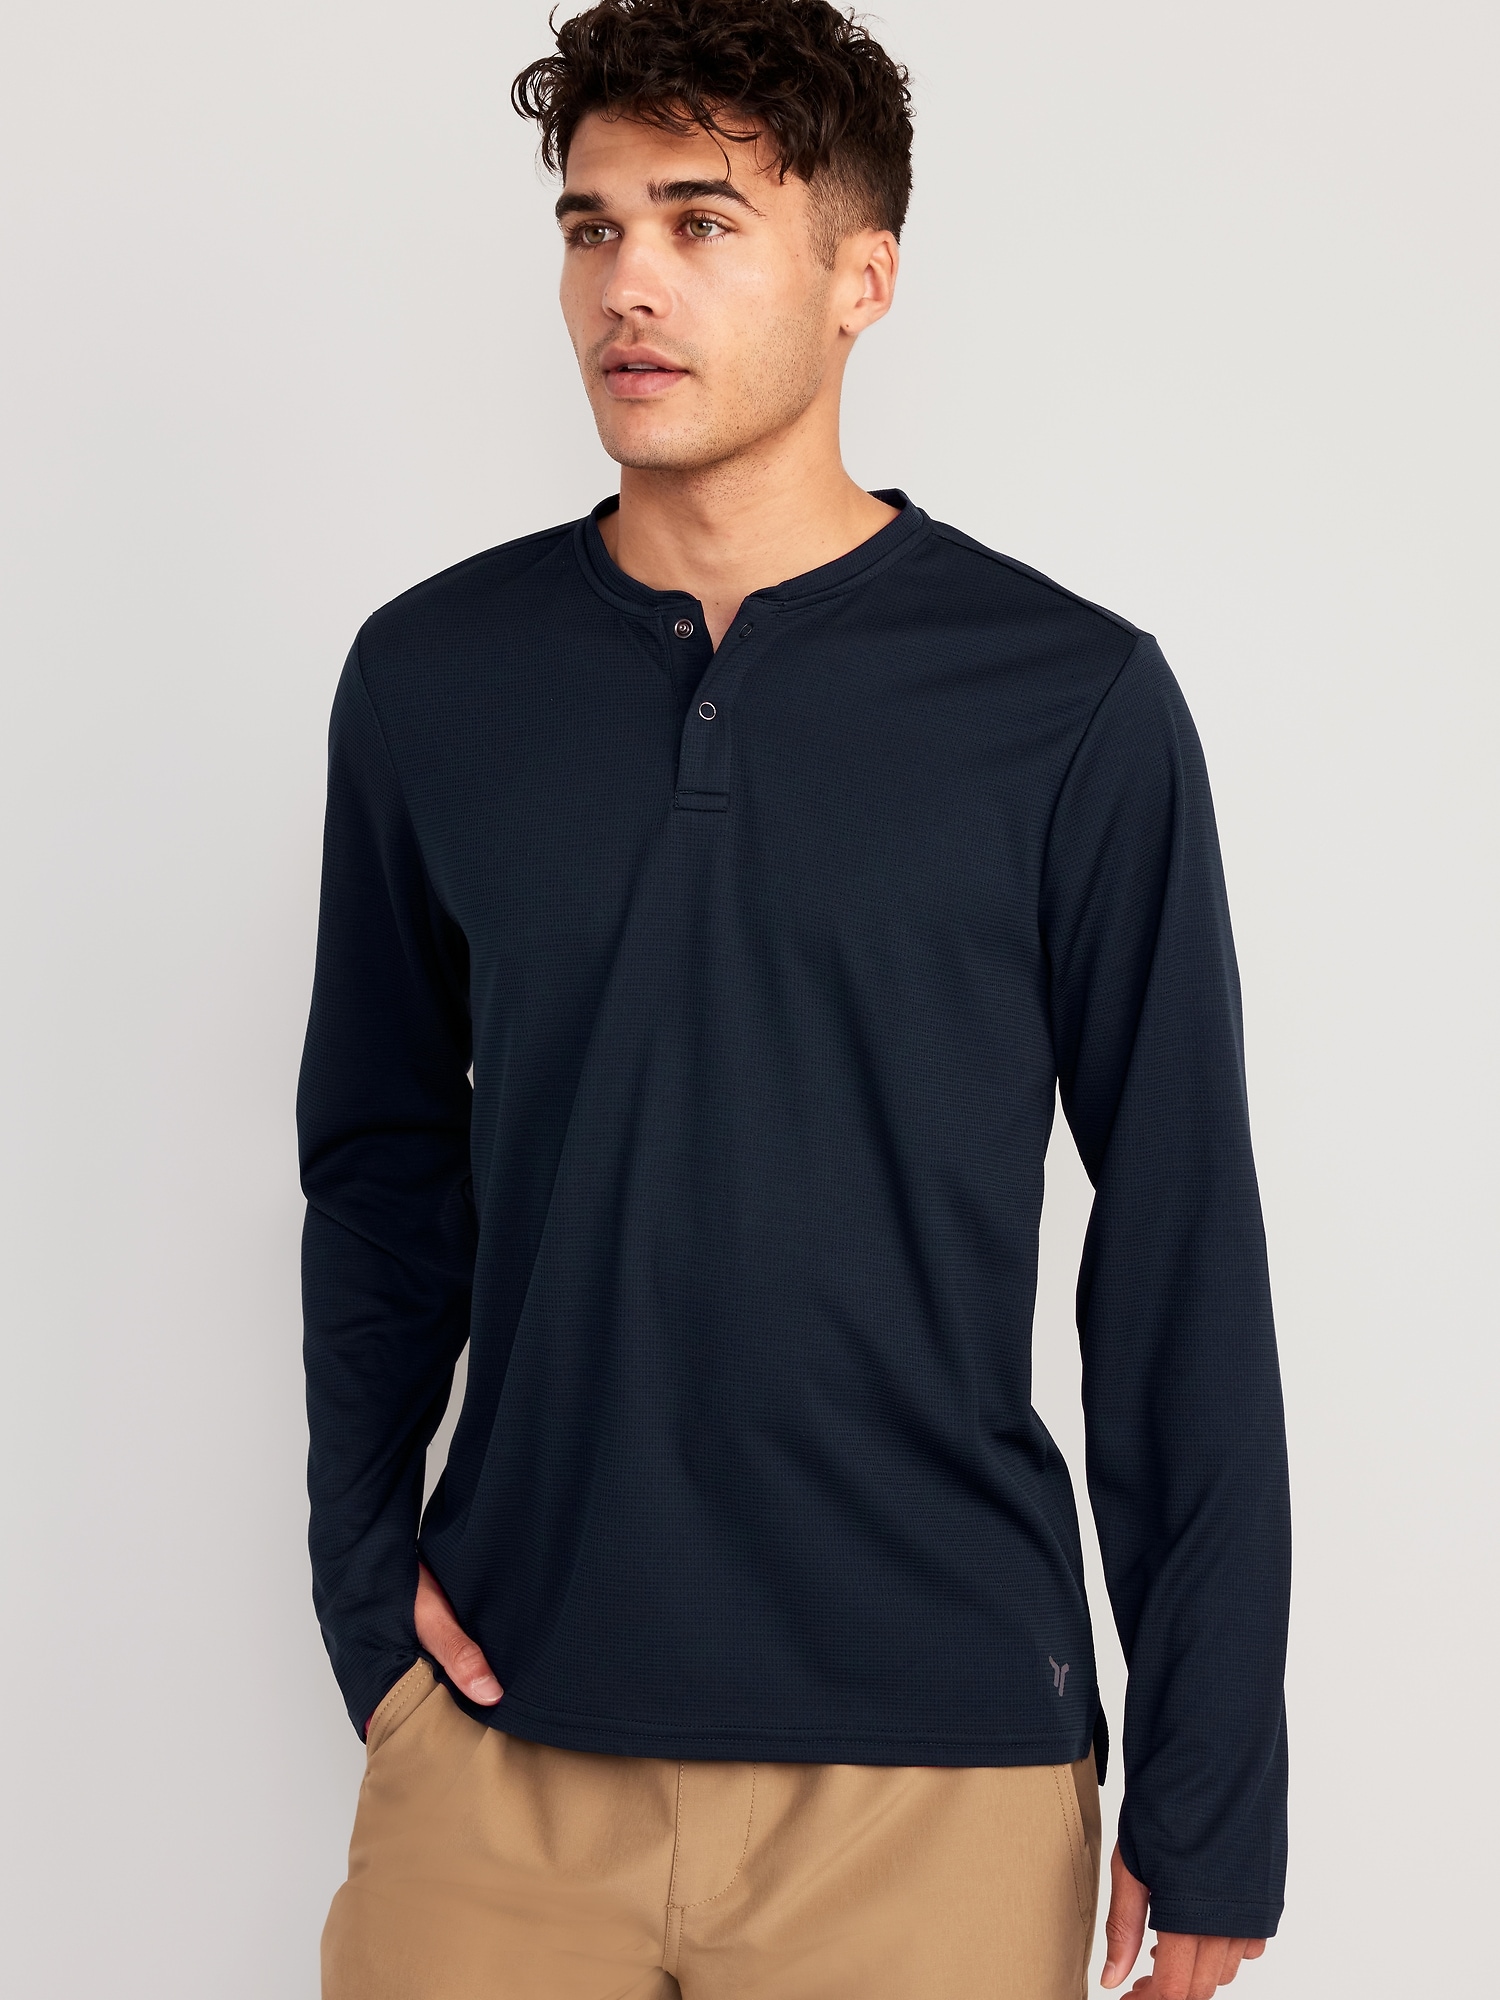 Long-Sleeve Thermal-Knit Performance Henley | Old Navy